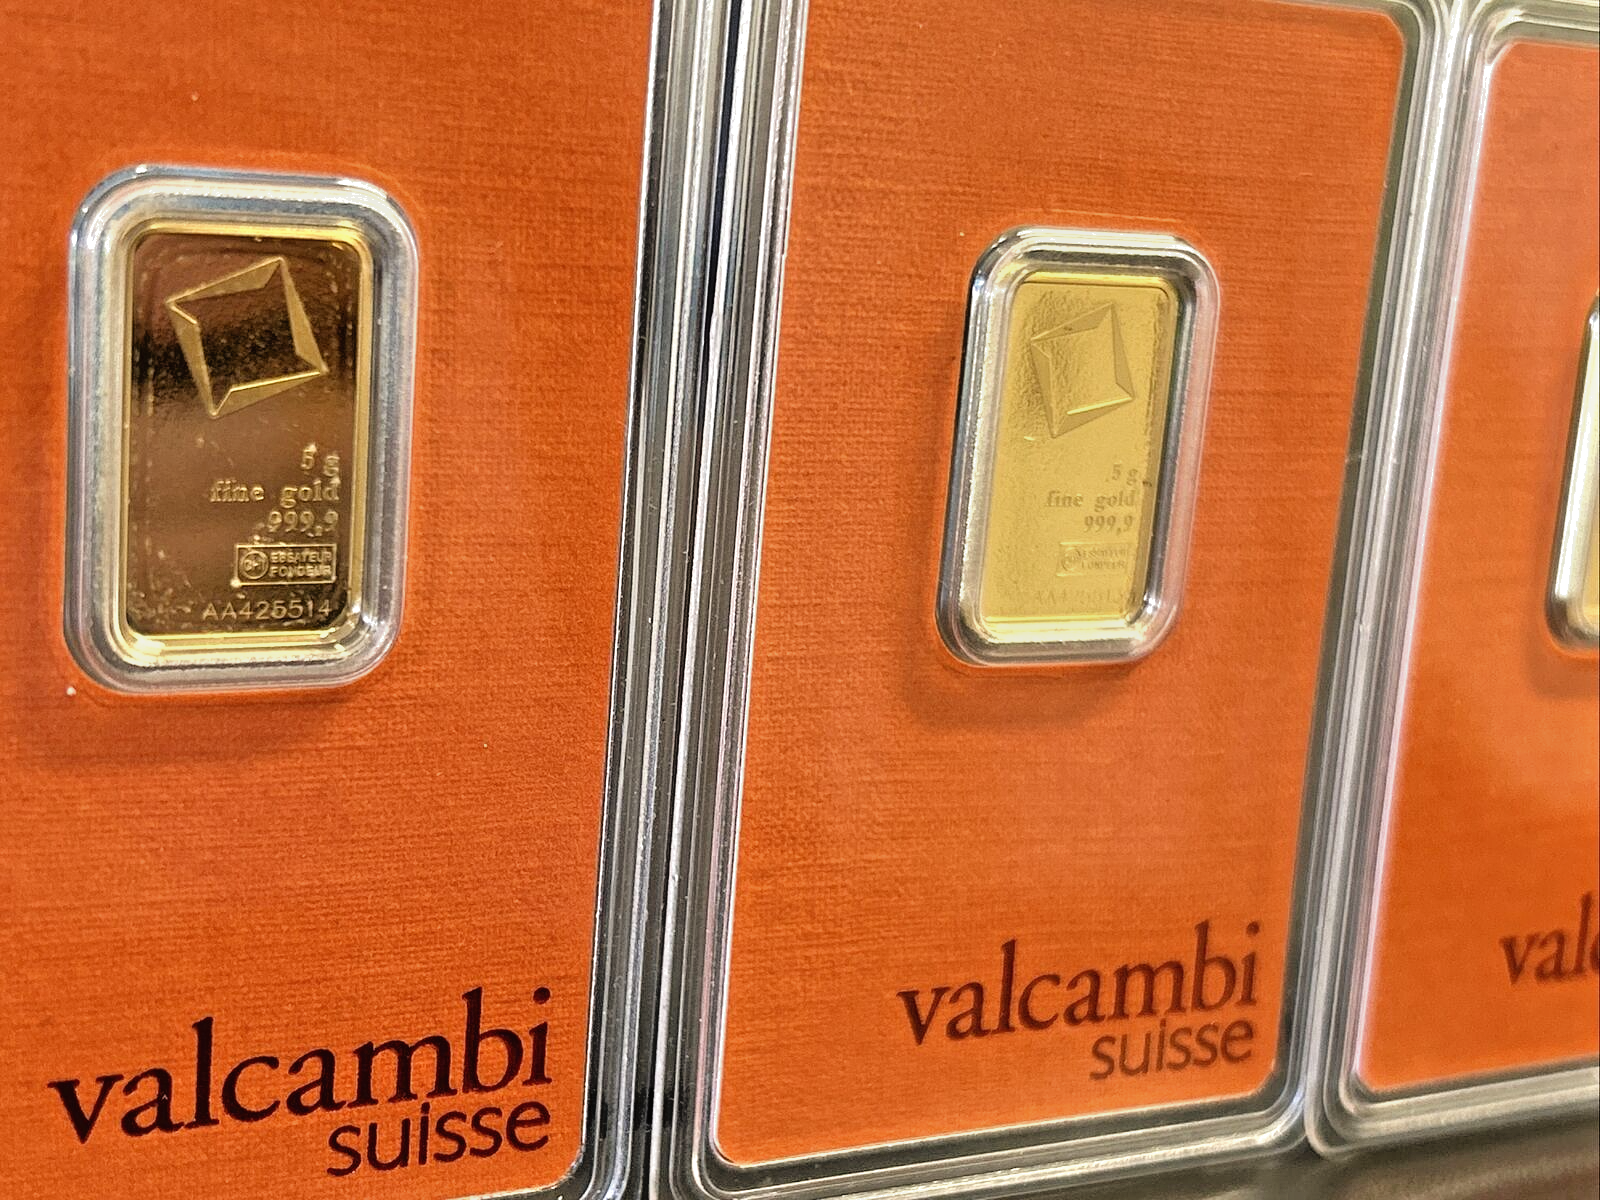 3 Valcambi Suisse 5 Gram Gold Bars 999.9 - Sealed w Assay & Serial Numbers